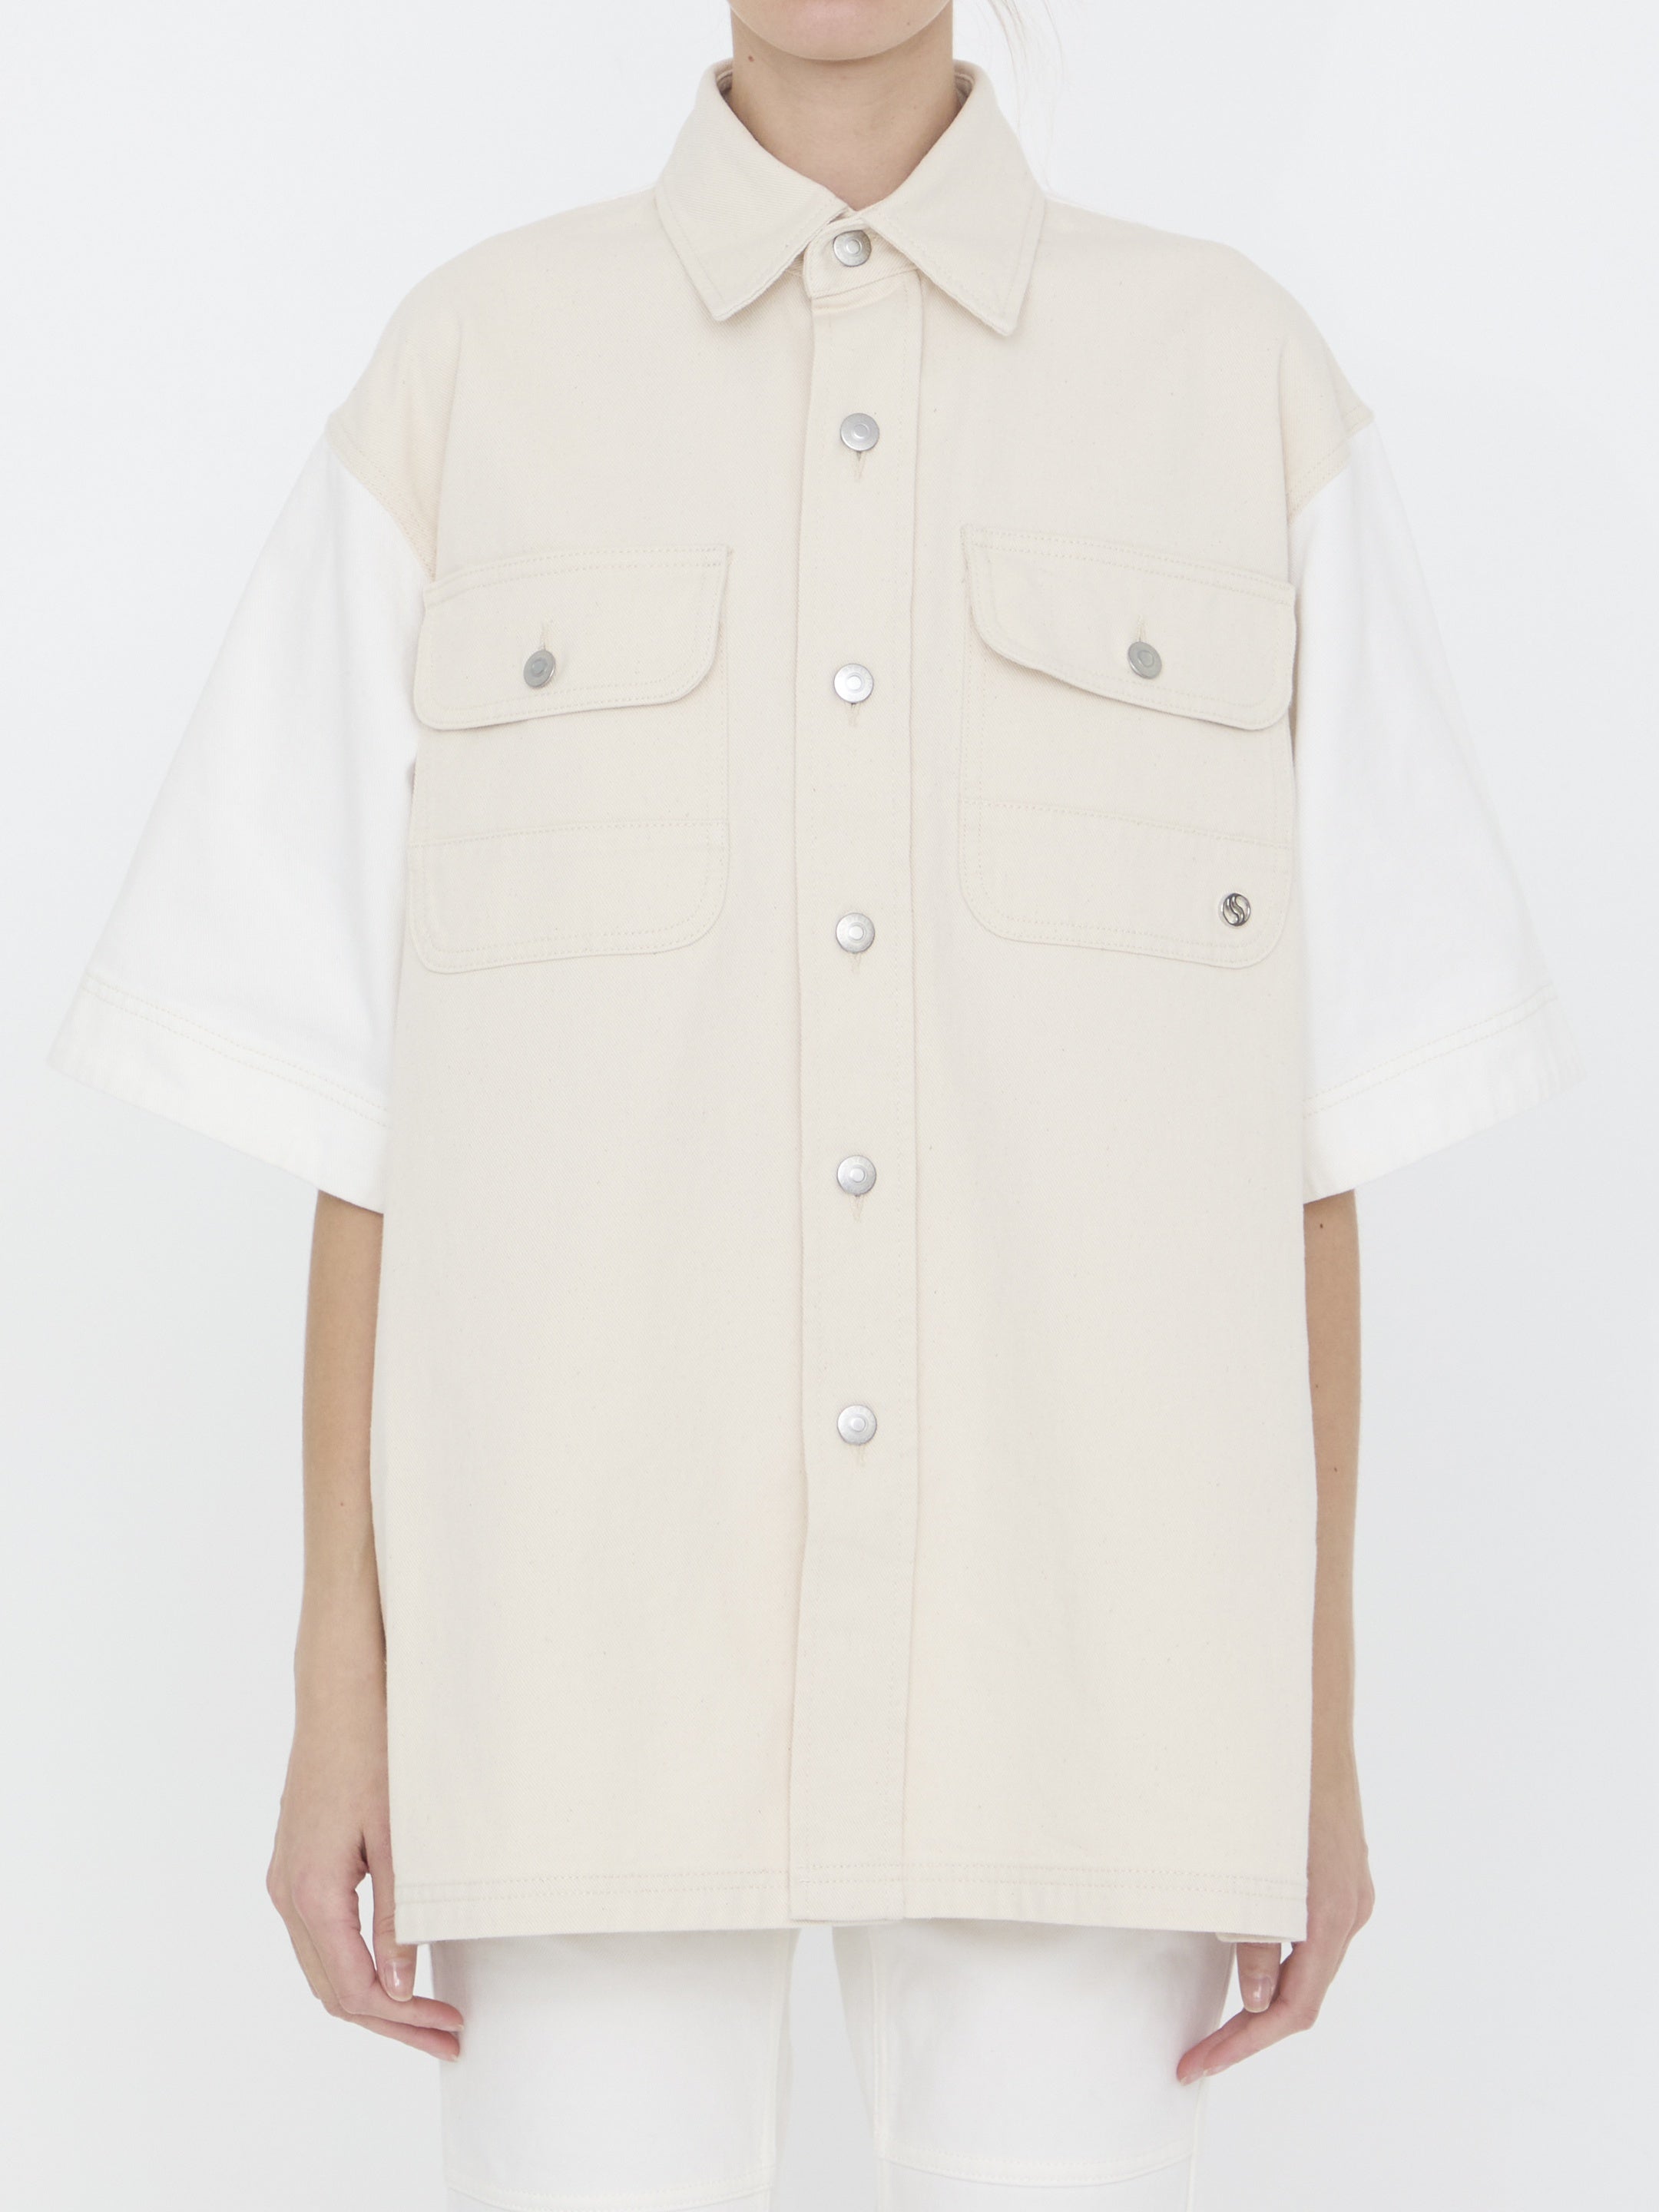 STELLA-MCCARTNEY-OUTLET-SALE-Workwear-shirt-Shirts-S-BEIGE-ARCHIVE-COLLECTION.jpg